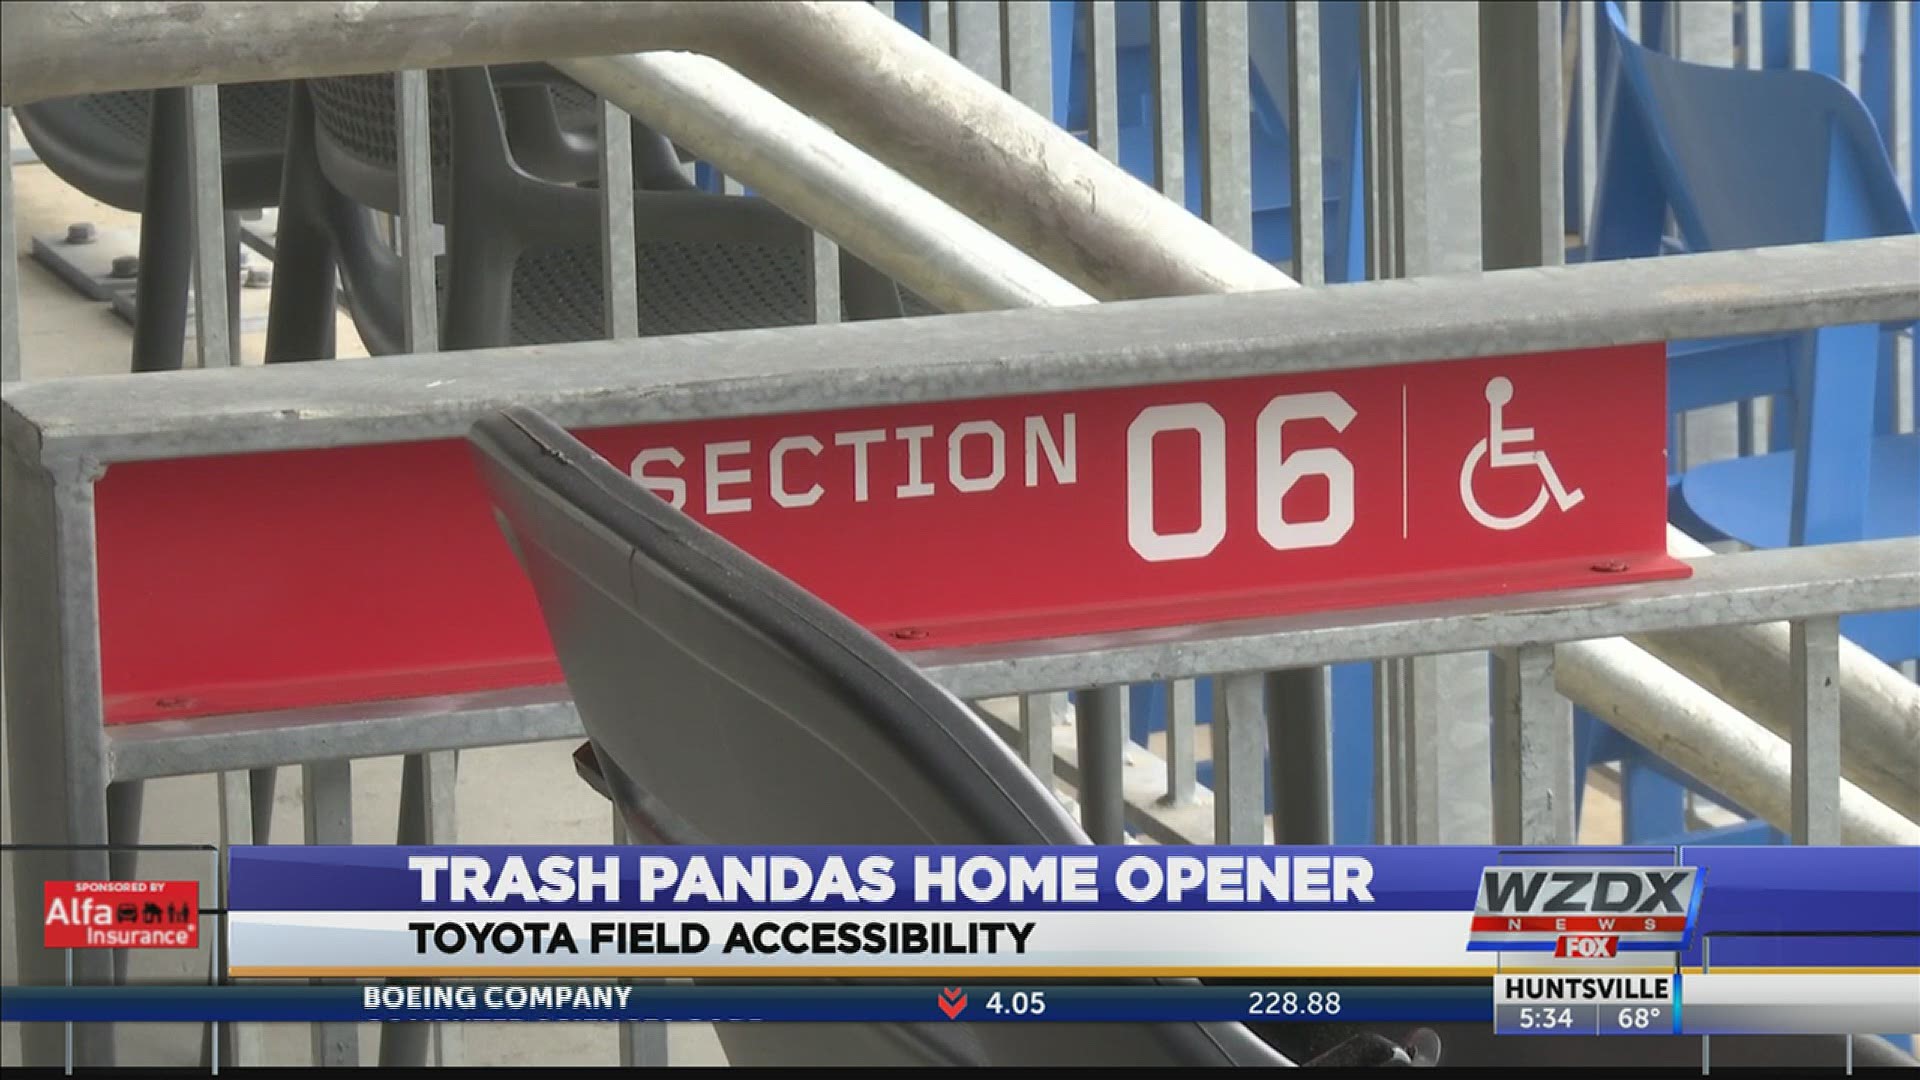 Going to a ball game is exciting, and Toyota Field is working to make sure that people with mobility issues or physical disabilities can join in the fun.